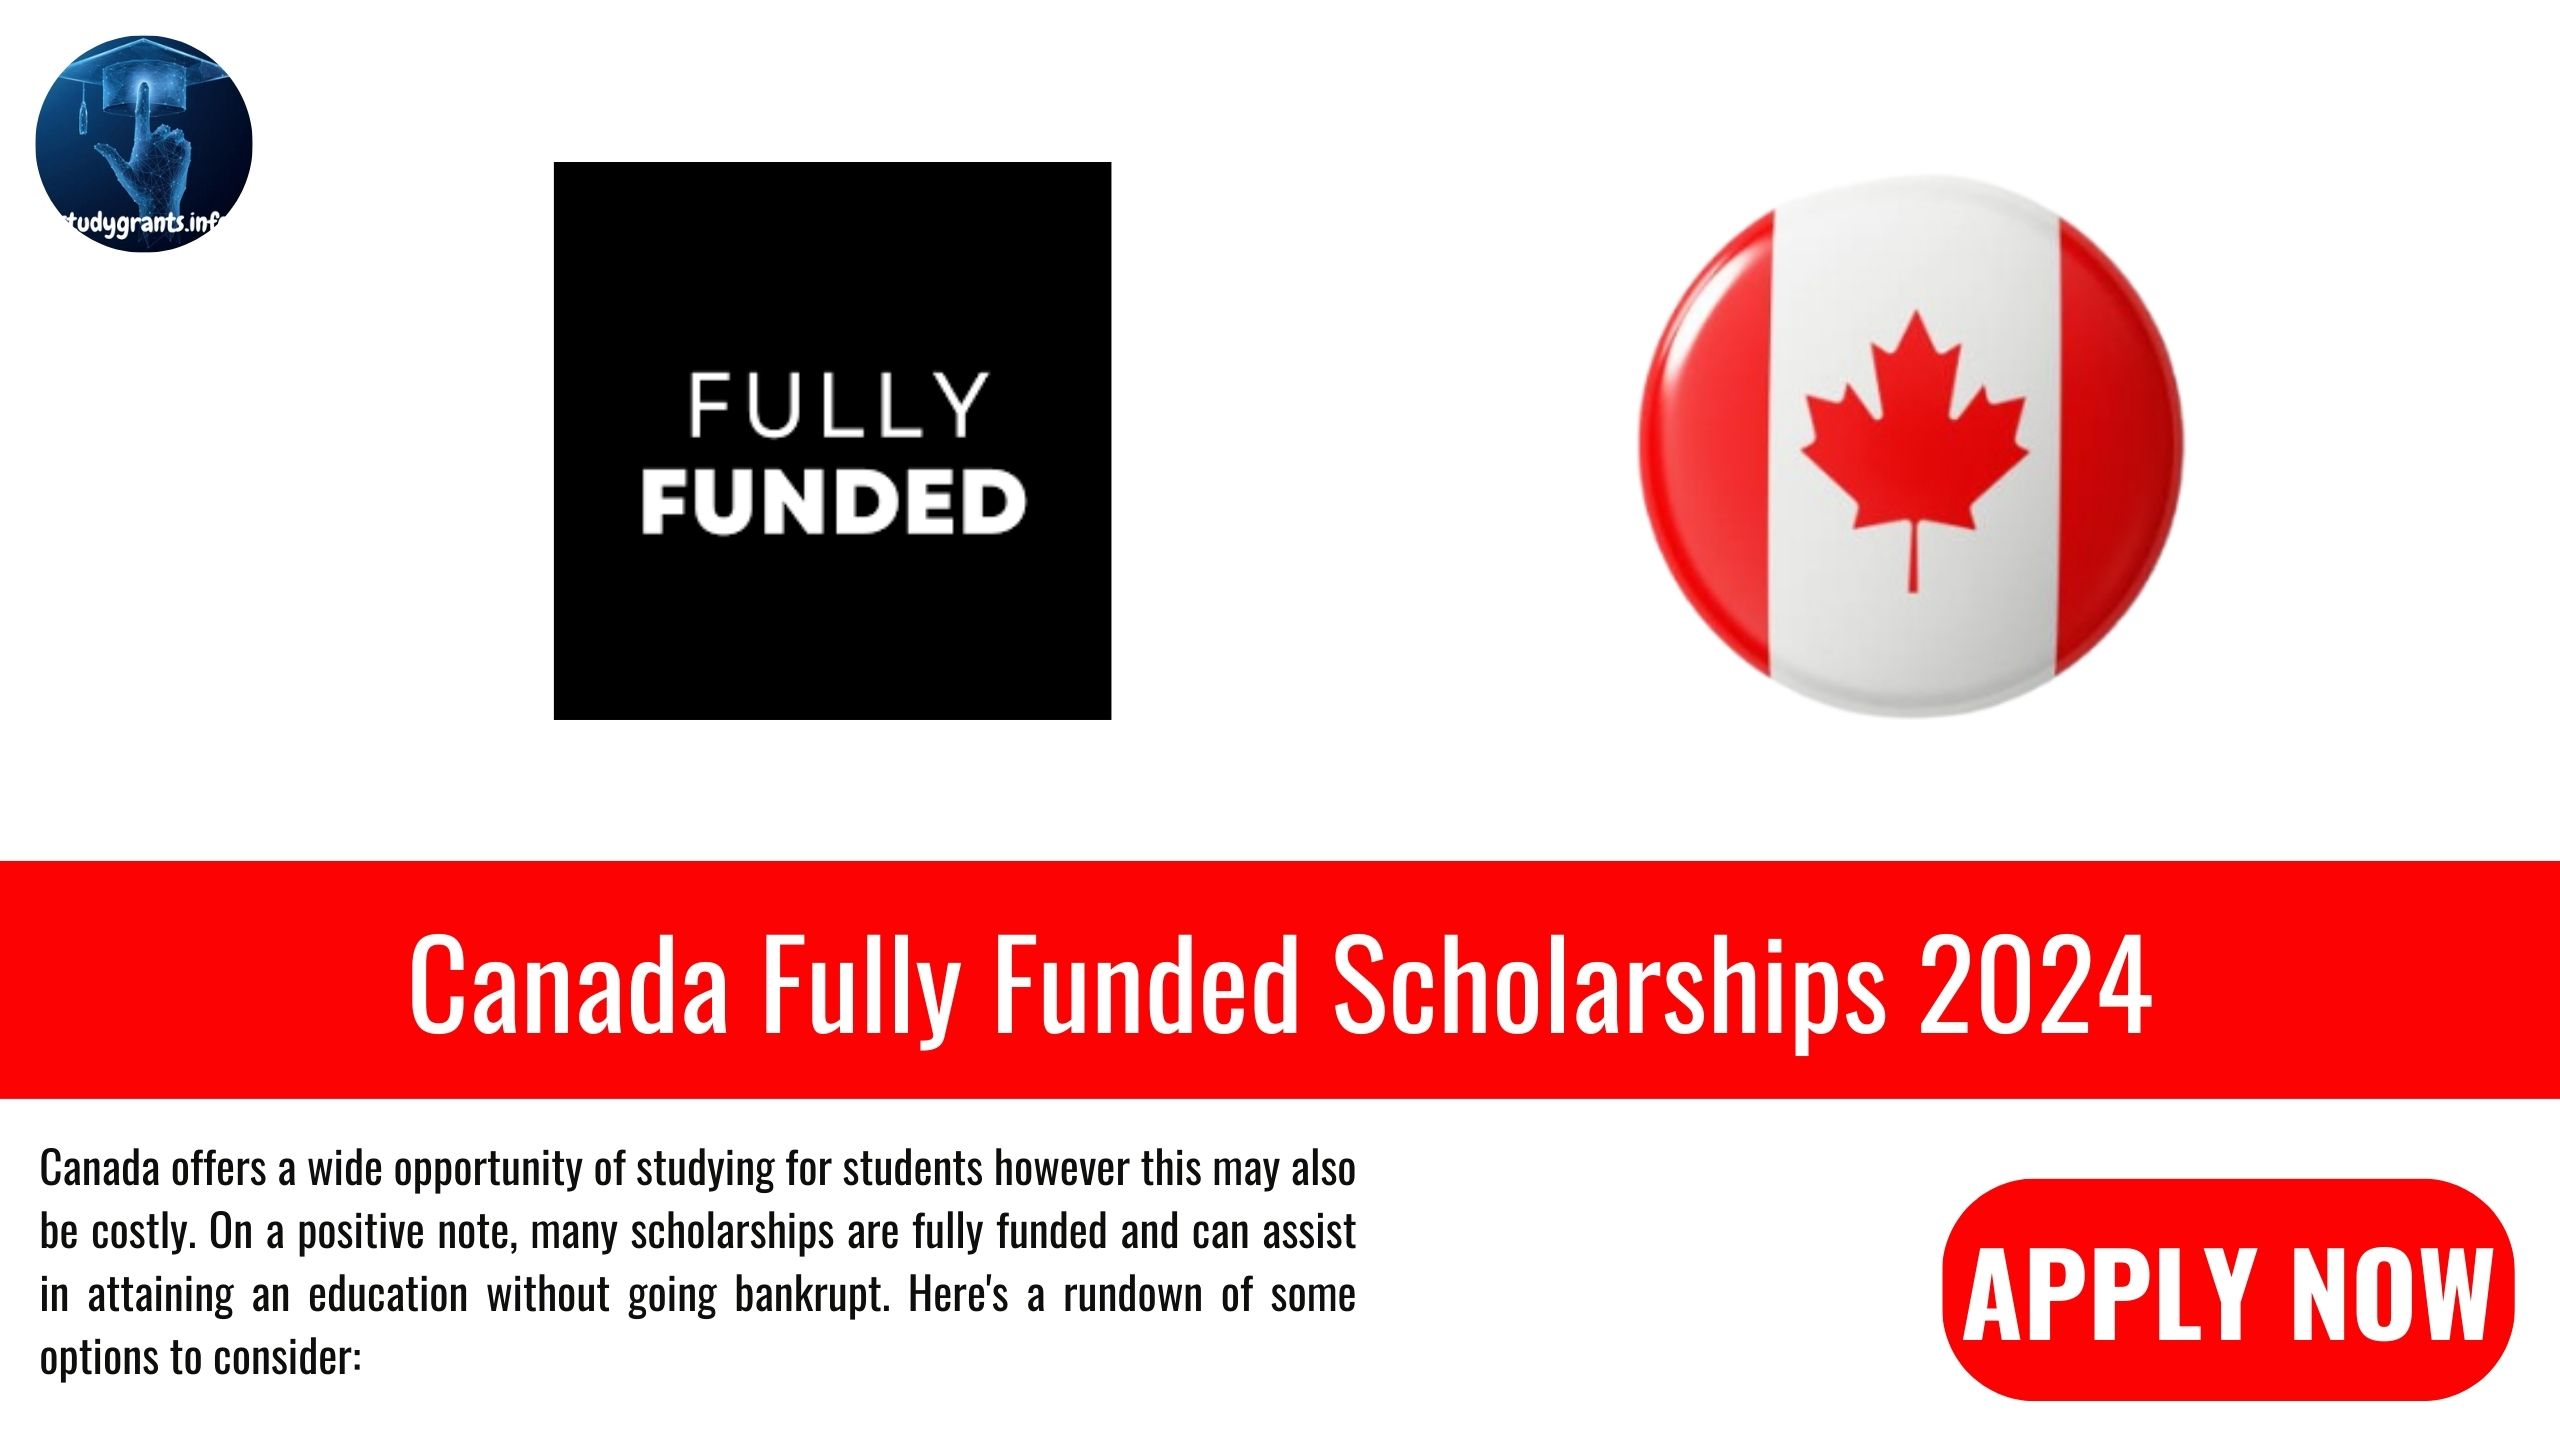 Canada Fully Funded Scholarships 2024 Study Grants